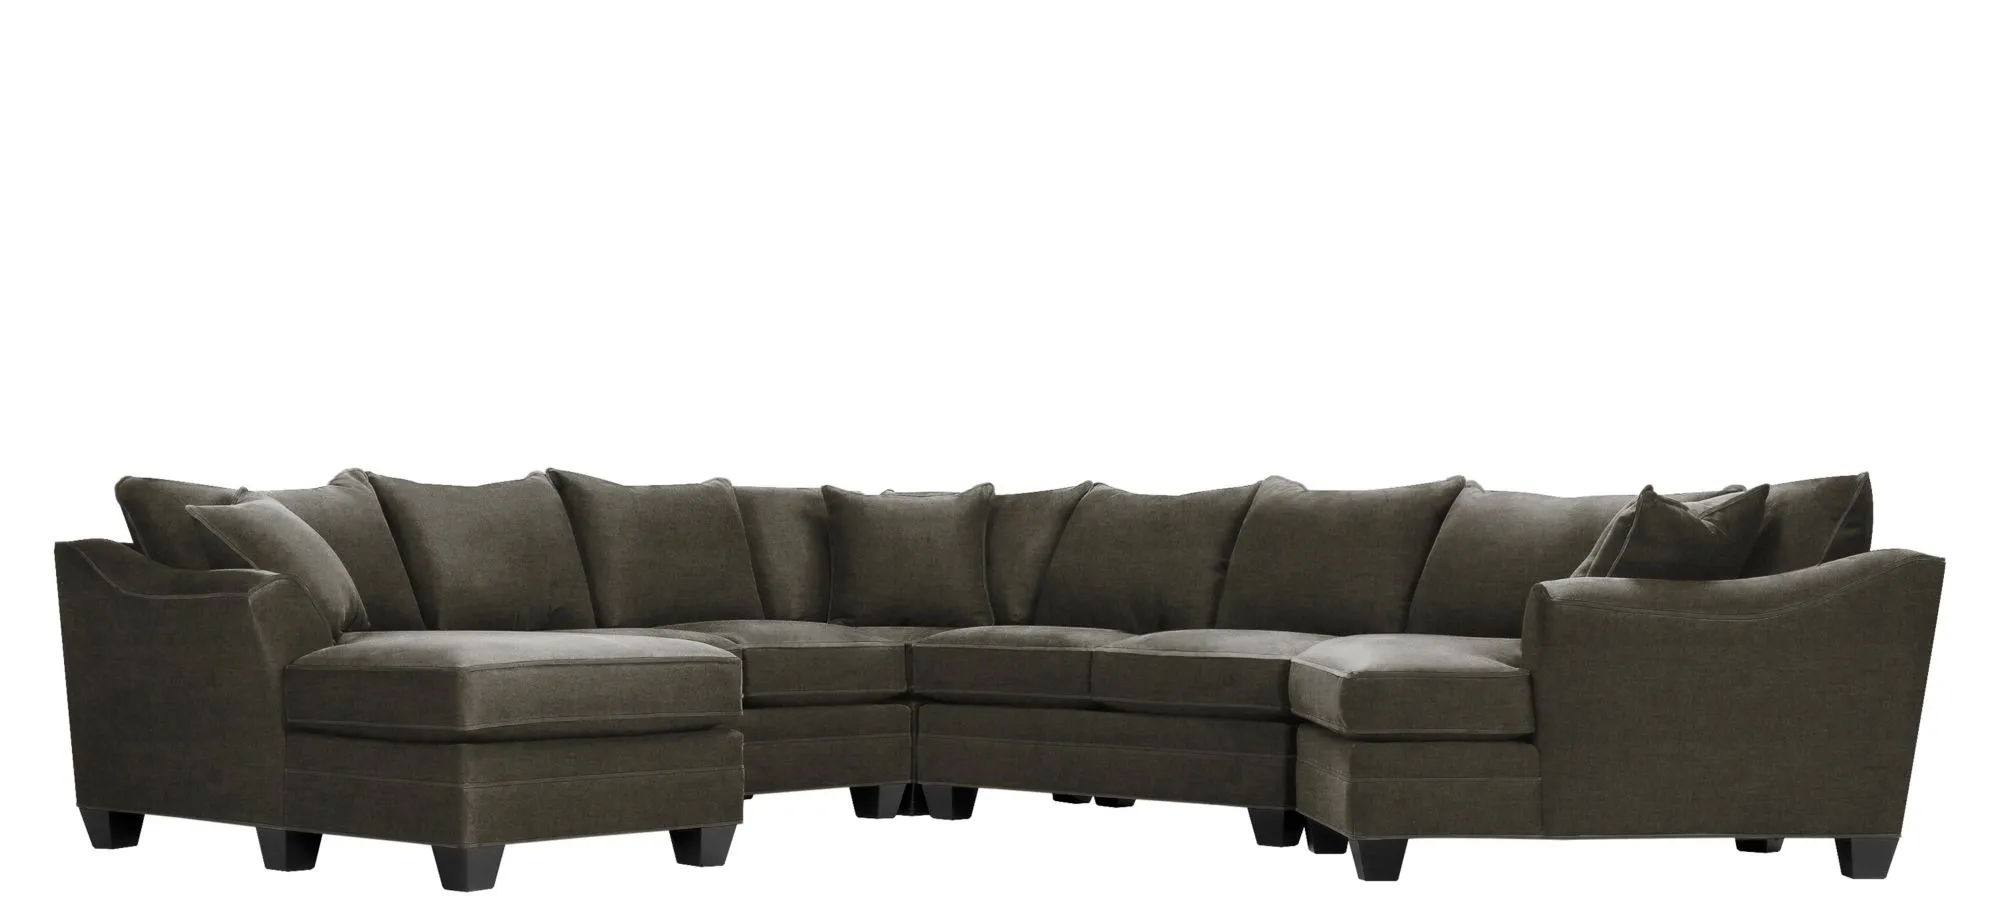 Foresthill 5-pc. Left Hand Facing Sectional Sofa in Santa Rosa Slate by H.M. Richards